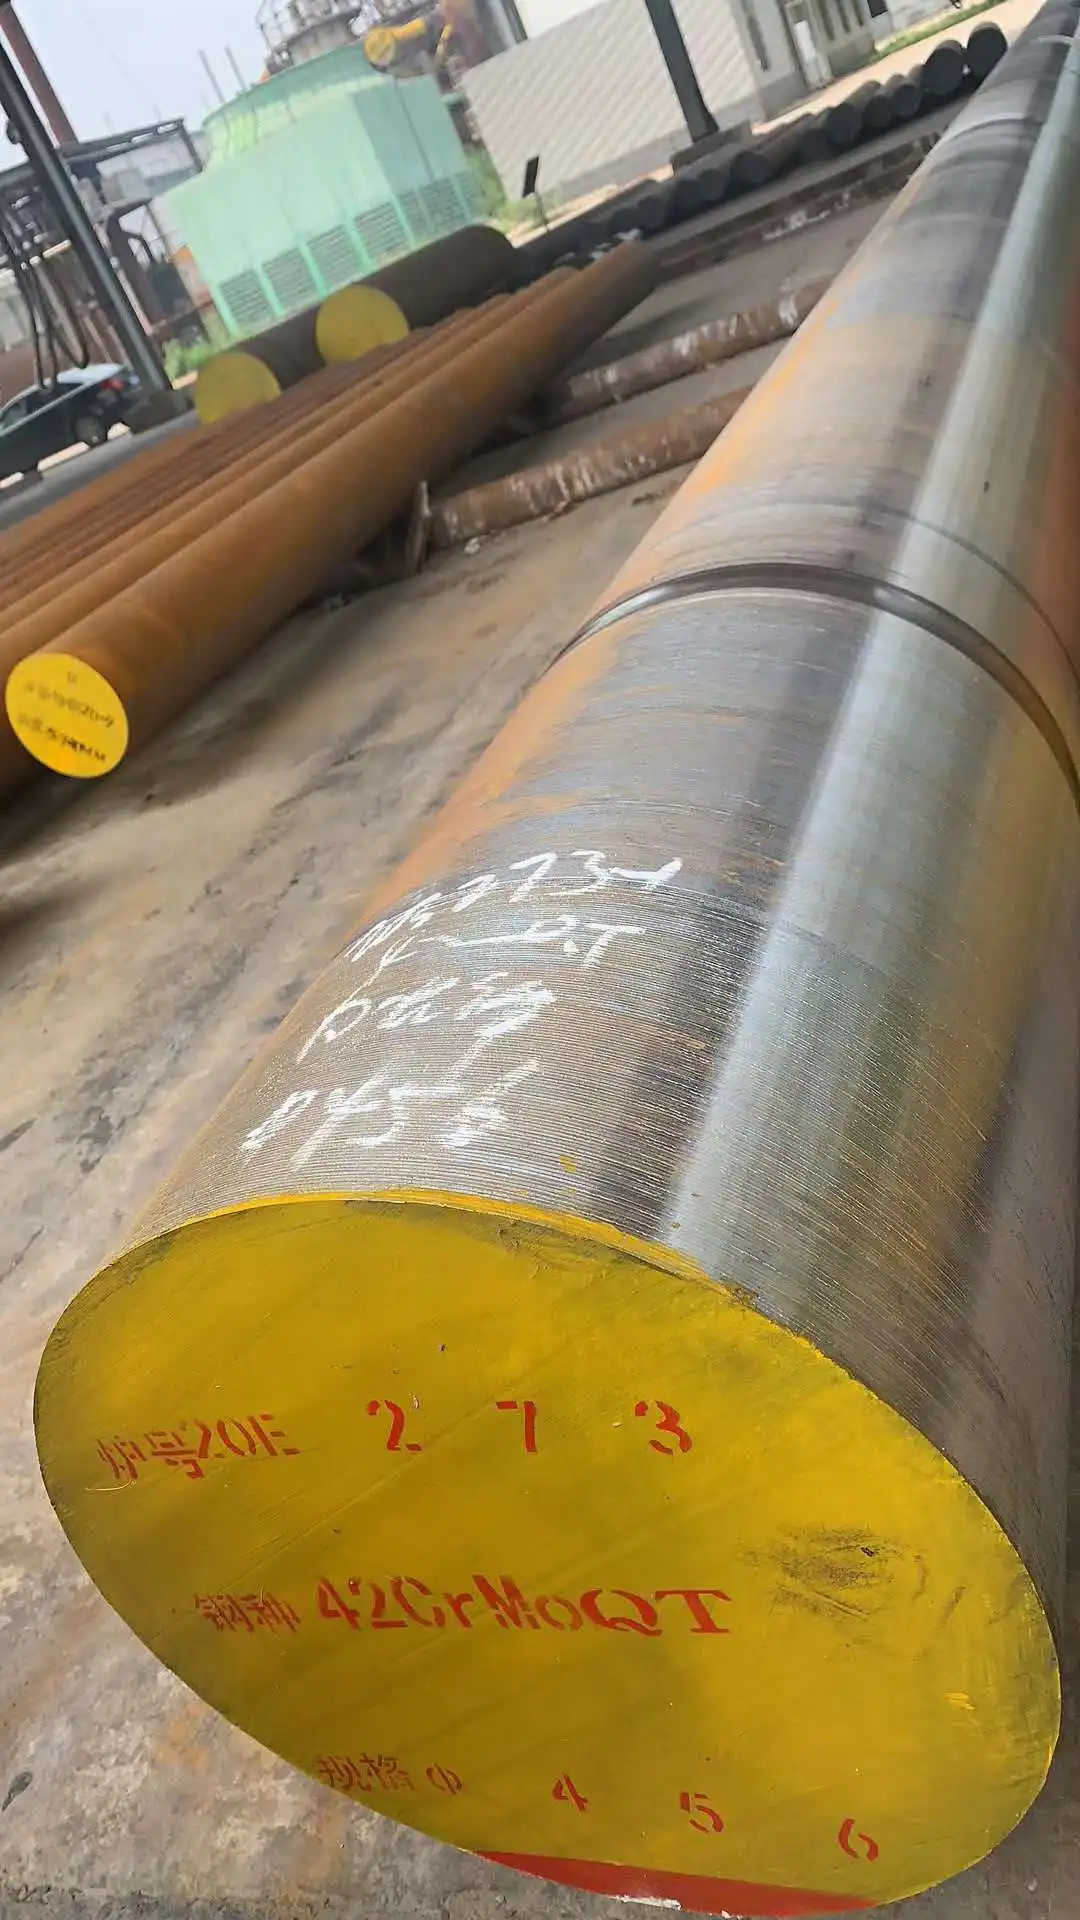 Sae1008 C1018 4340 Prime Steel Wire Rod Buy Carbon Steel Round Bar 4340 C1018 Steel Round Bar Sae1008 Prime Steel Wire Rod Product On Alibaba Com